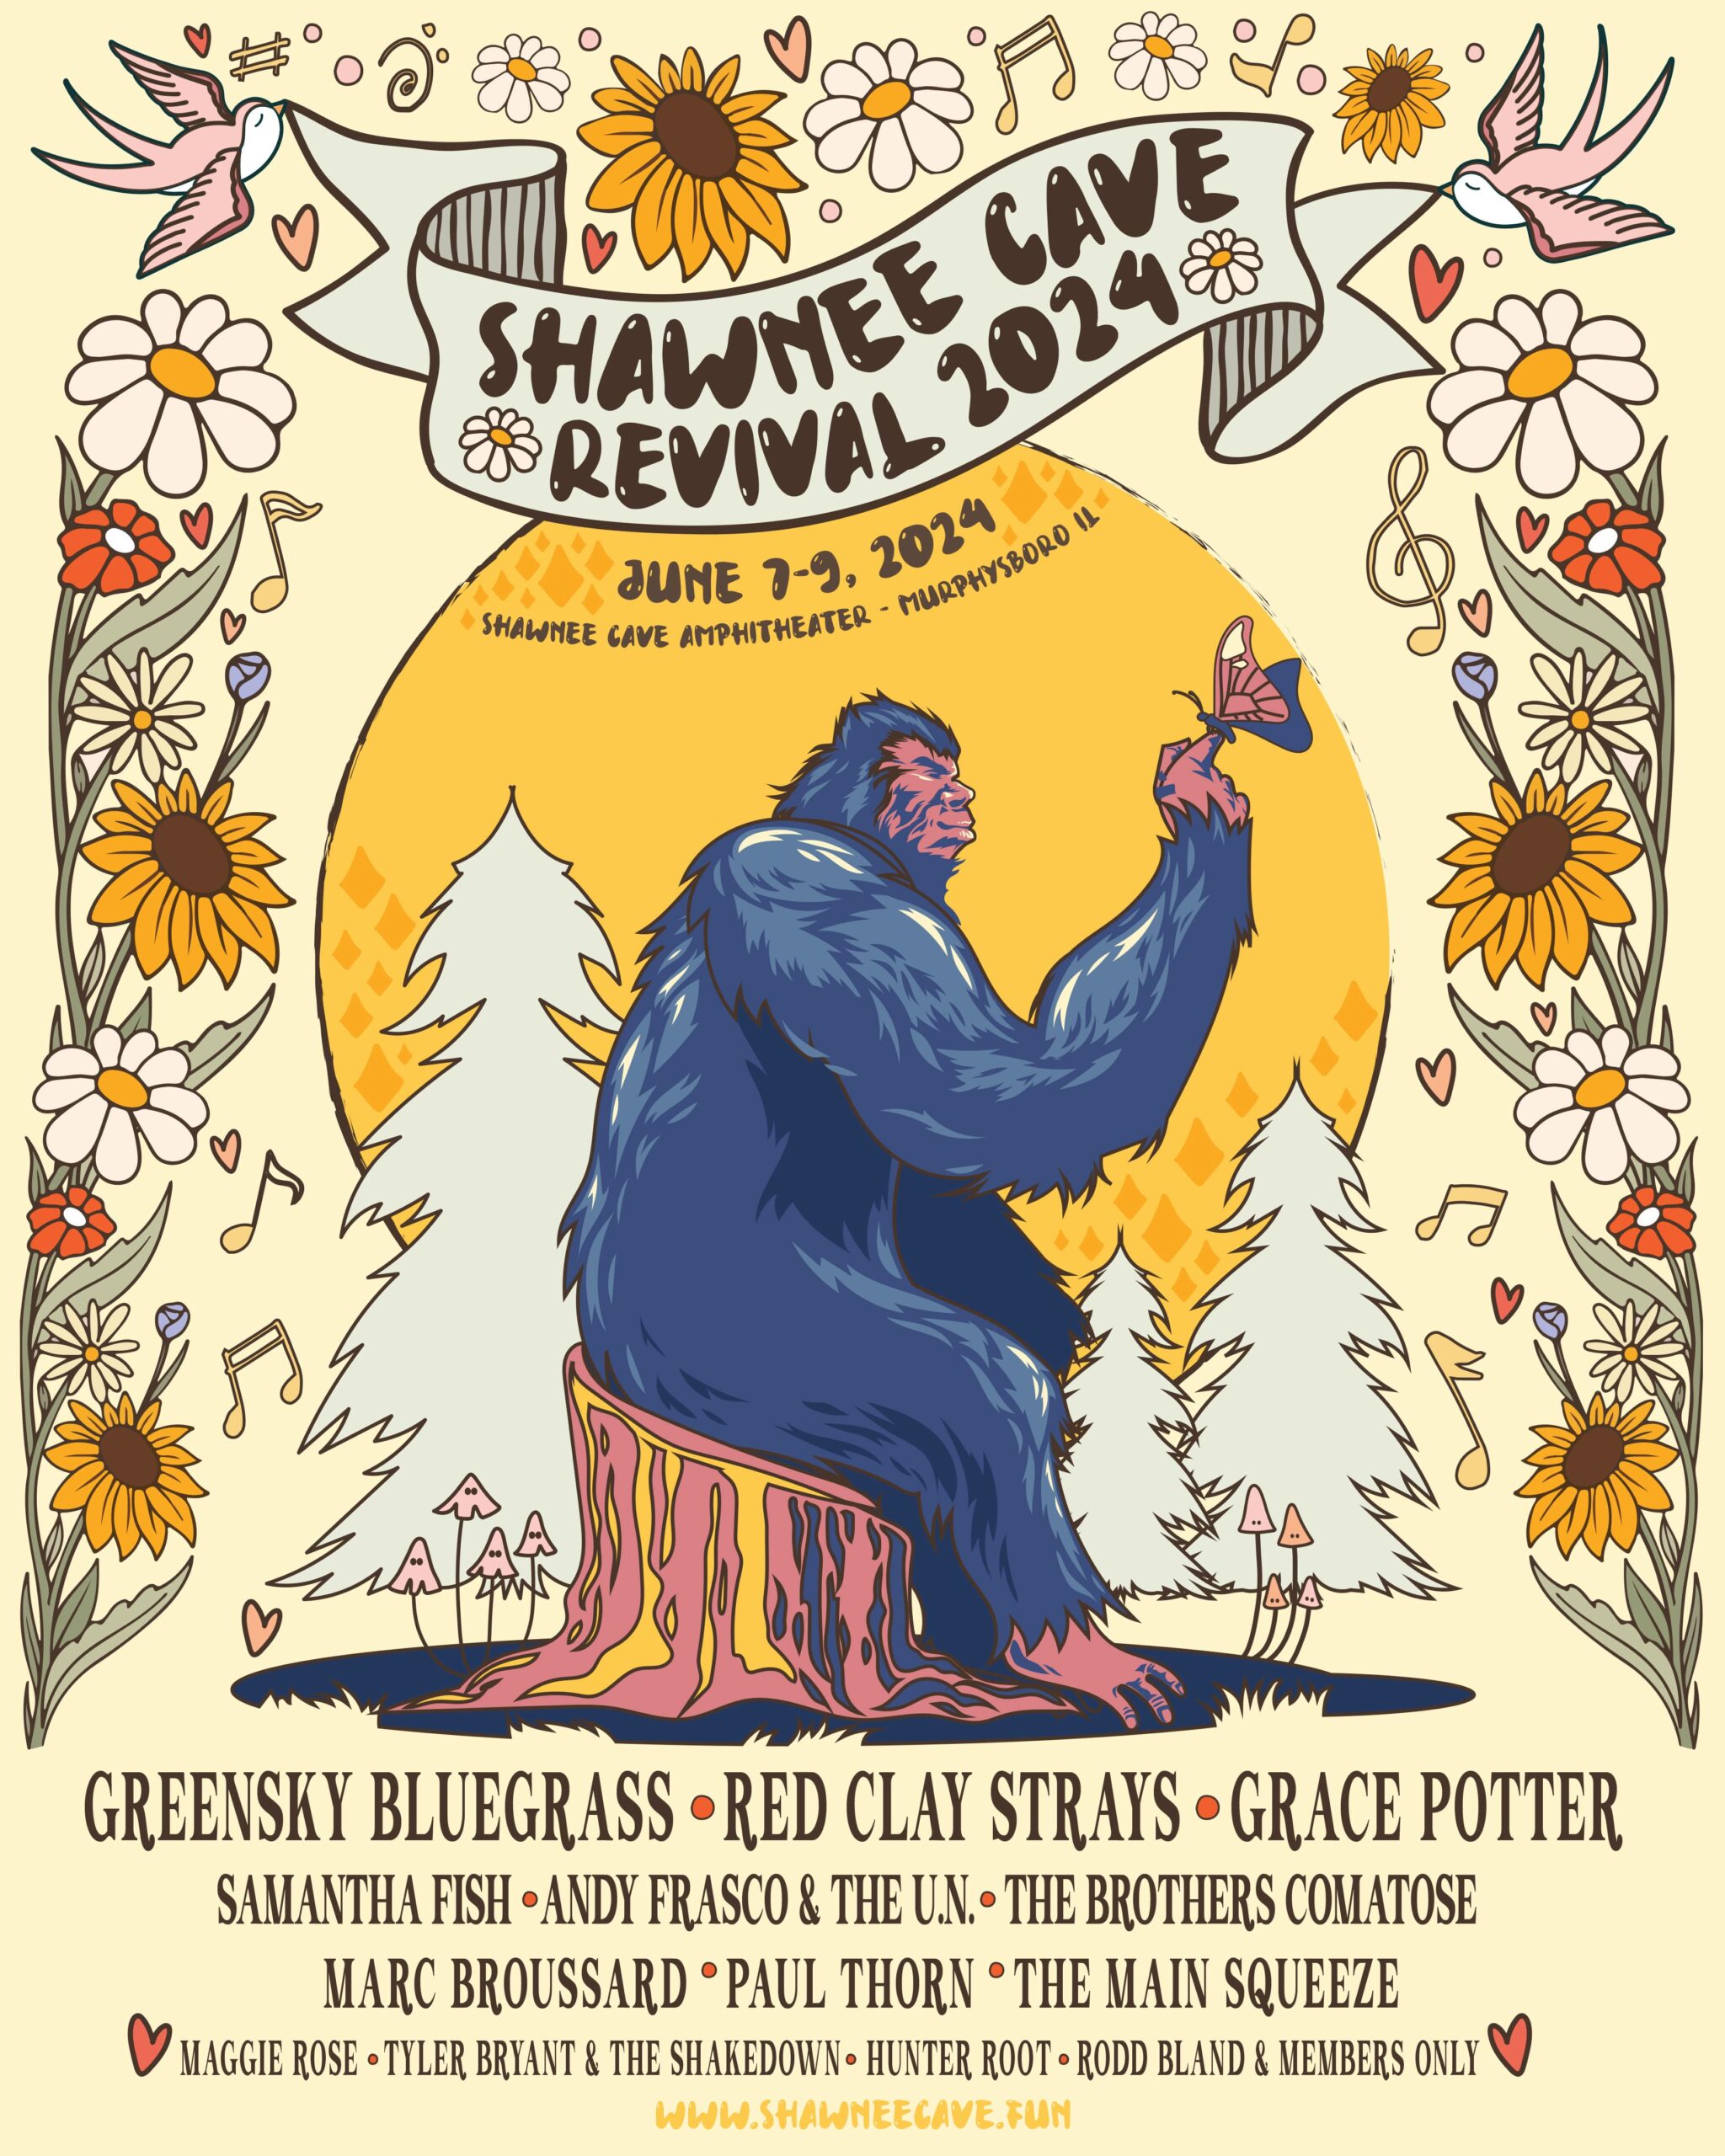 Shawnee Cave Revival Music & Camping Festival Returns for an Unforgettable Weekend